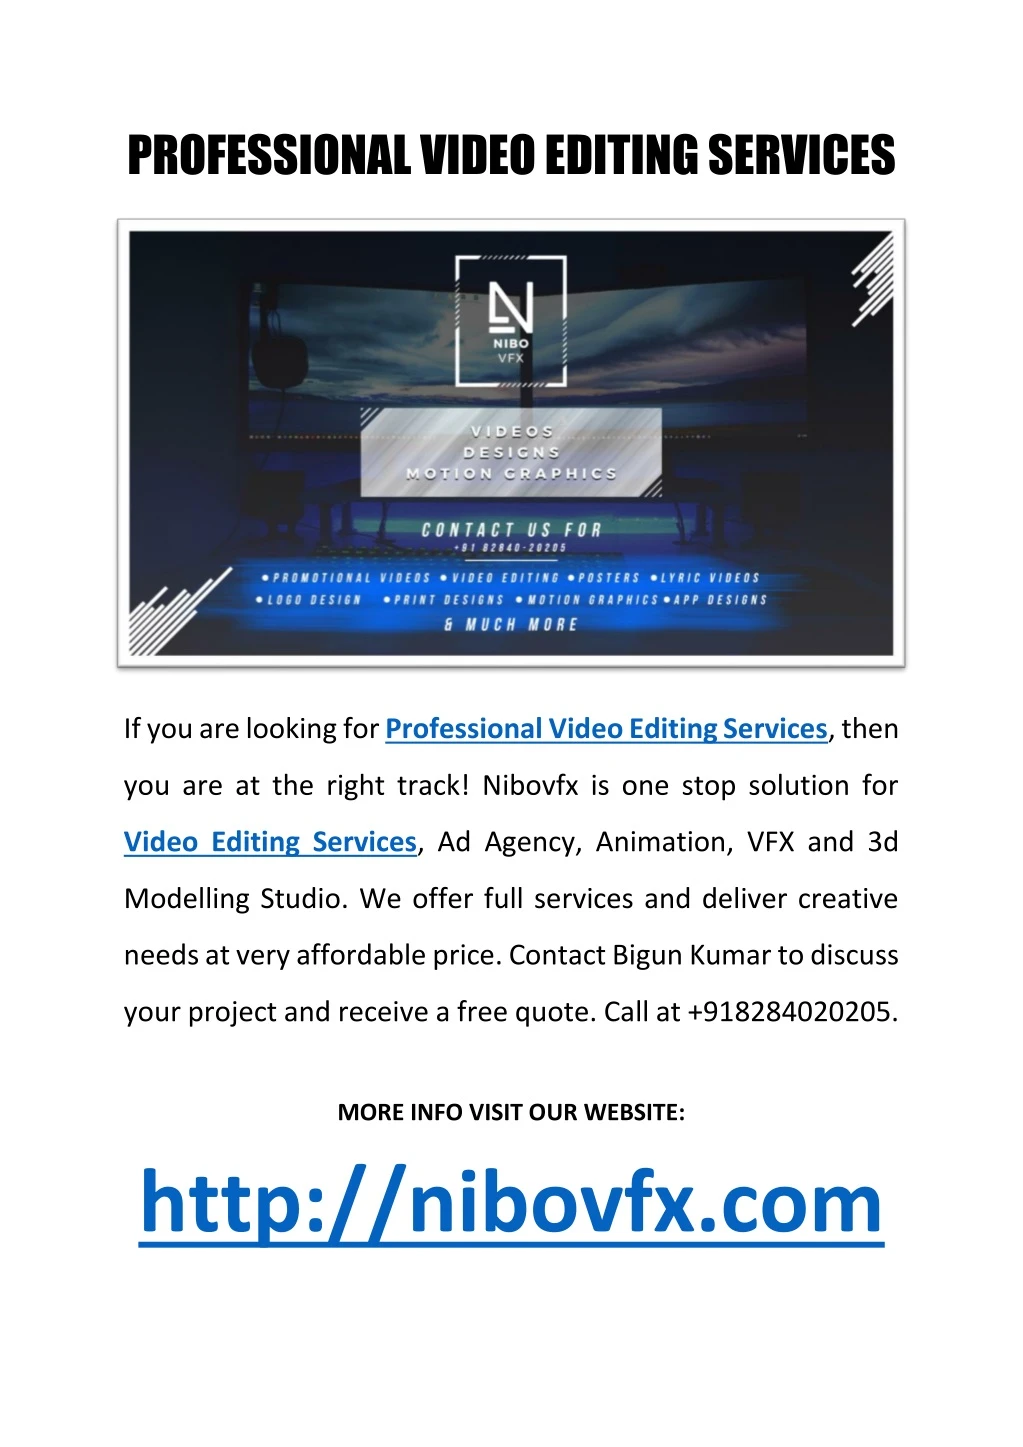 professional video editing services